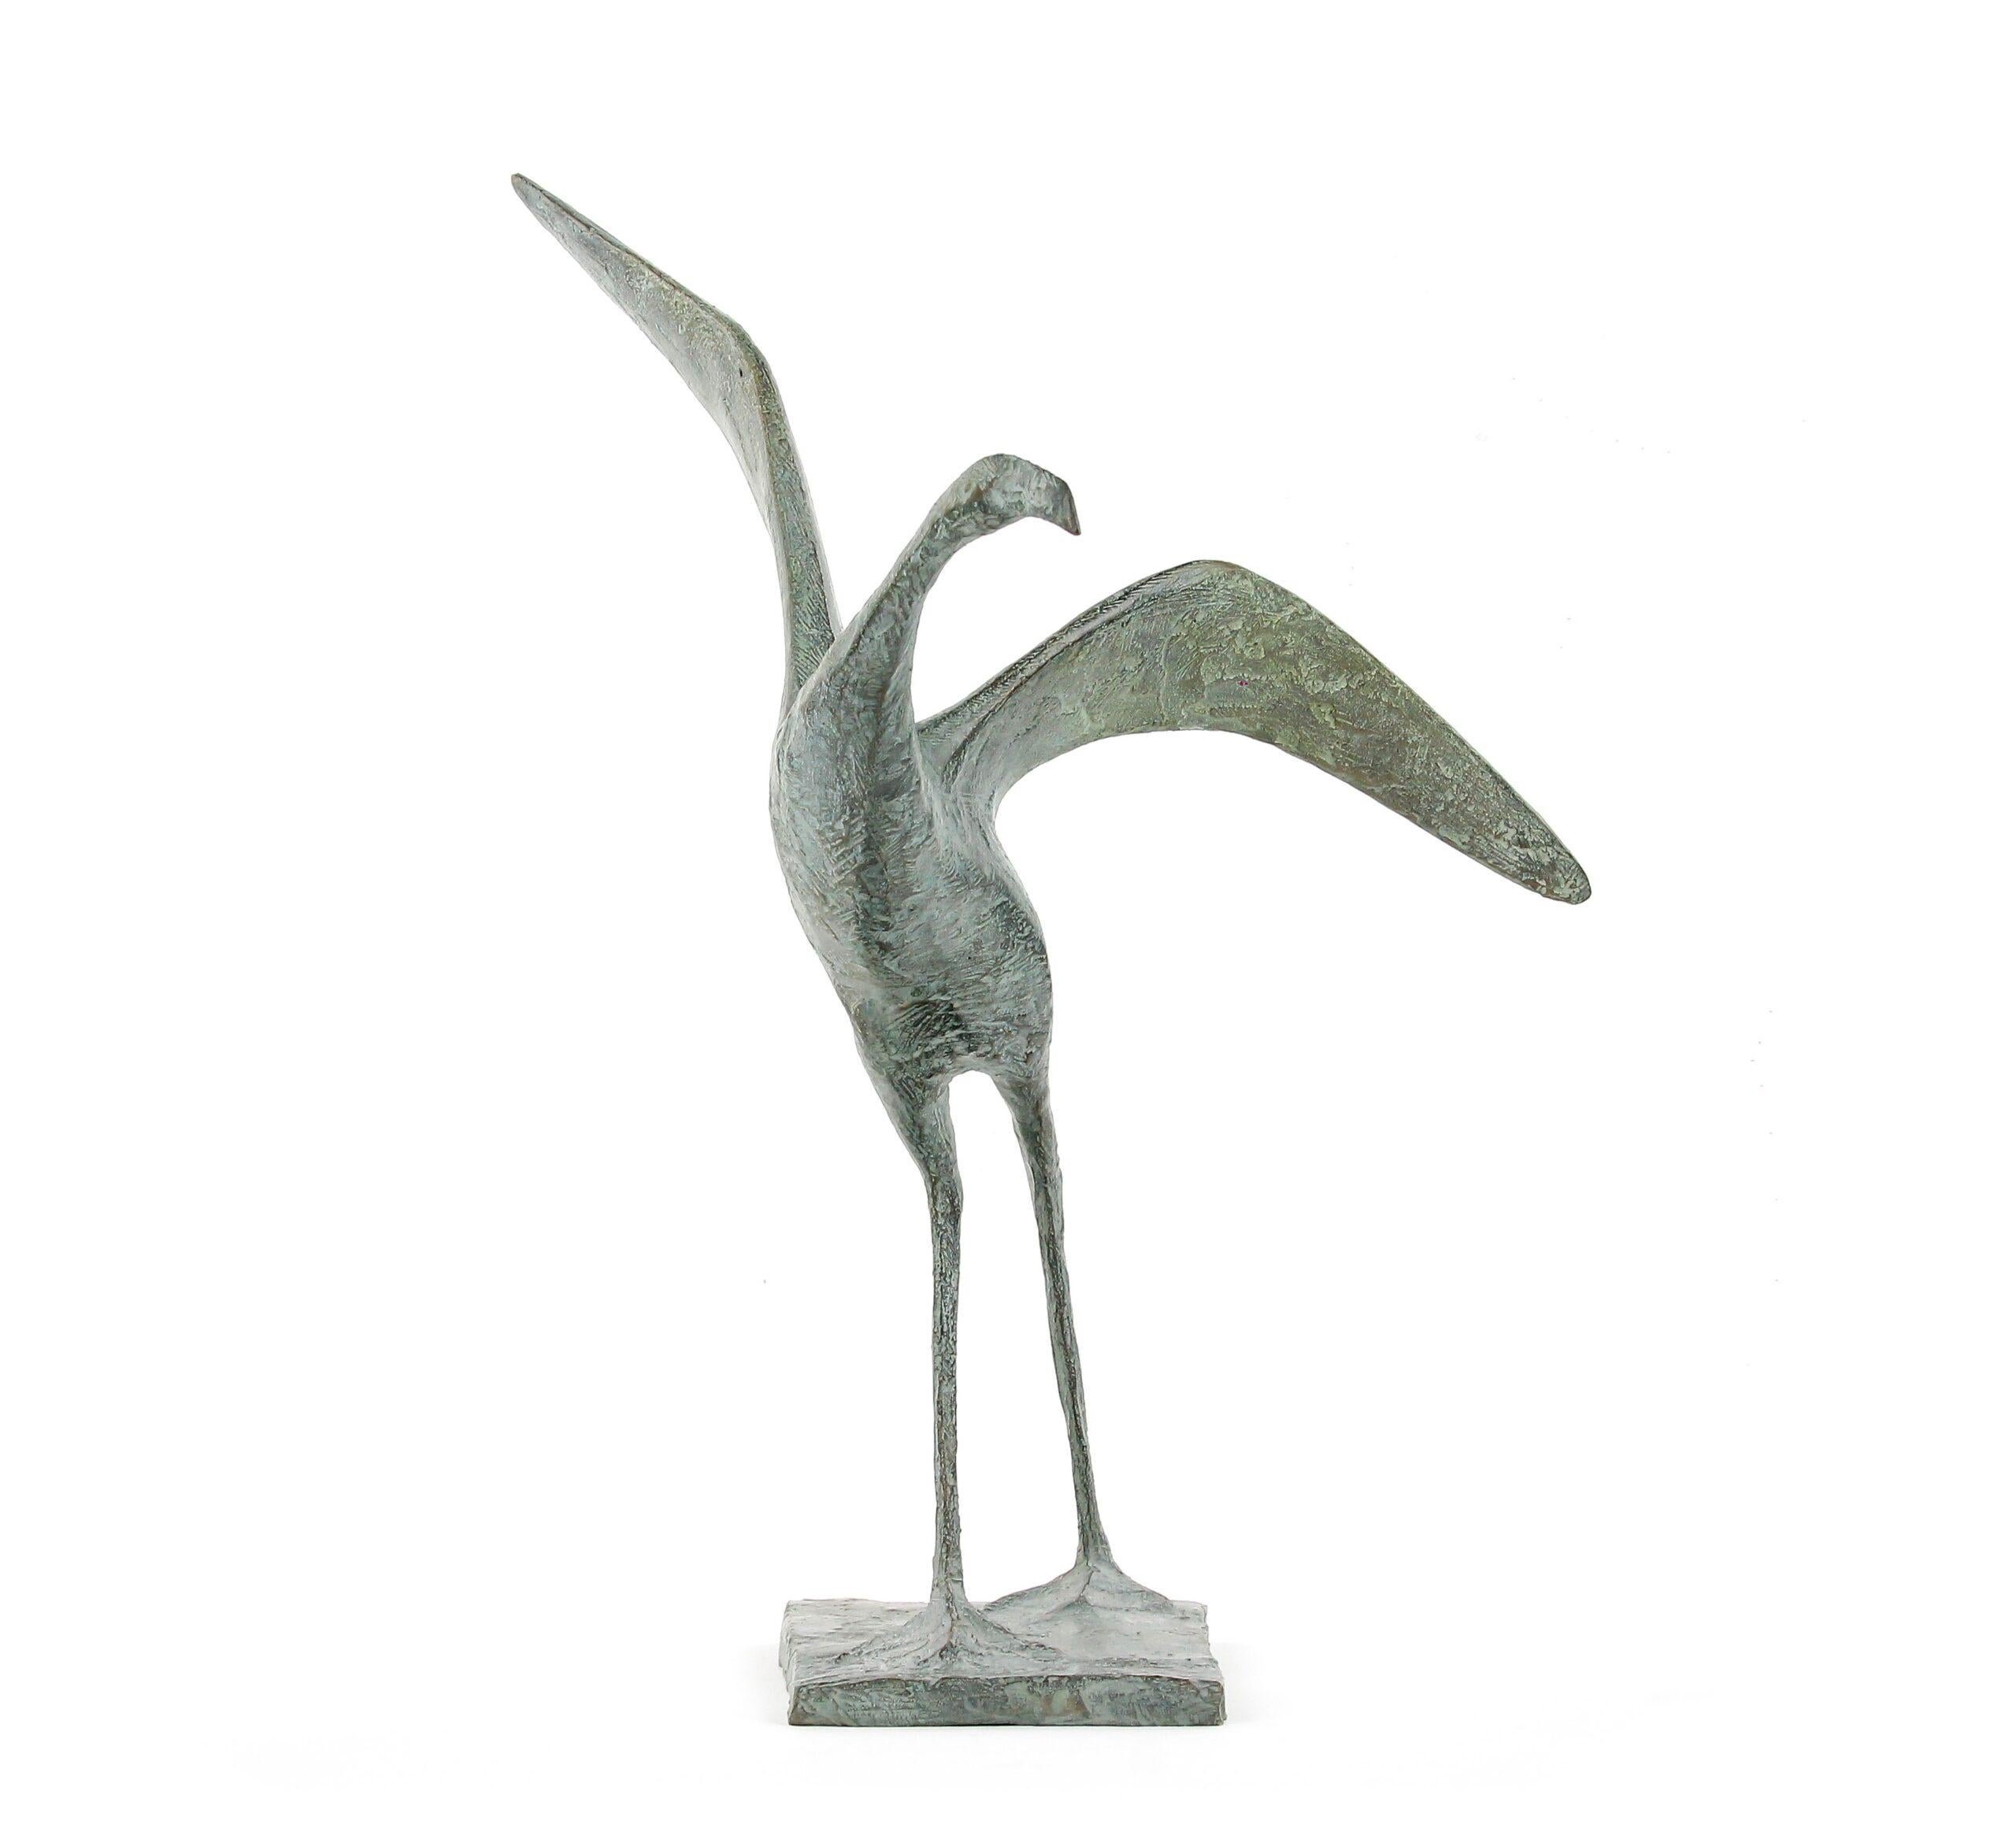 Flight VI is a bronze sculpture by French contemporary artist Pierre Yermia, dimensions are 32 × 34 × 32 cm (12.6 × 13.4 × 12.6 in). The sculpture is signed and numbered, it is part of a limited edition of 8 editions + 4 artist’s proofs, and comes